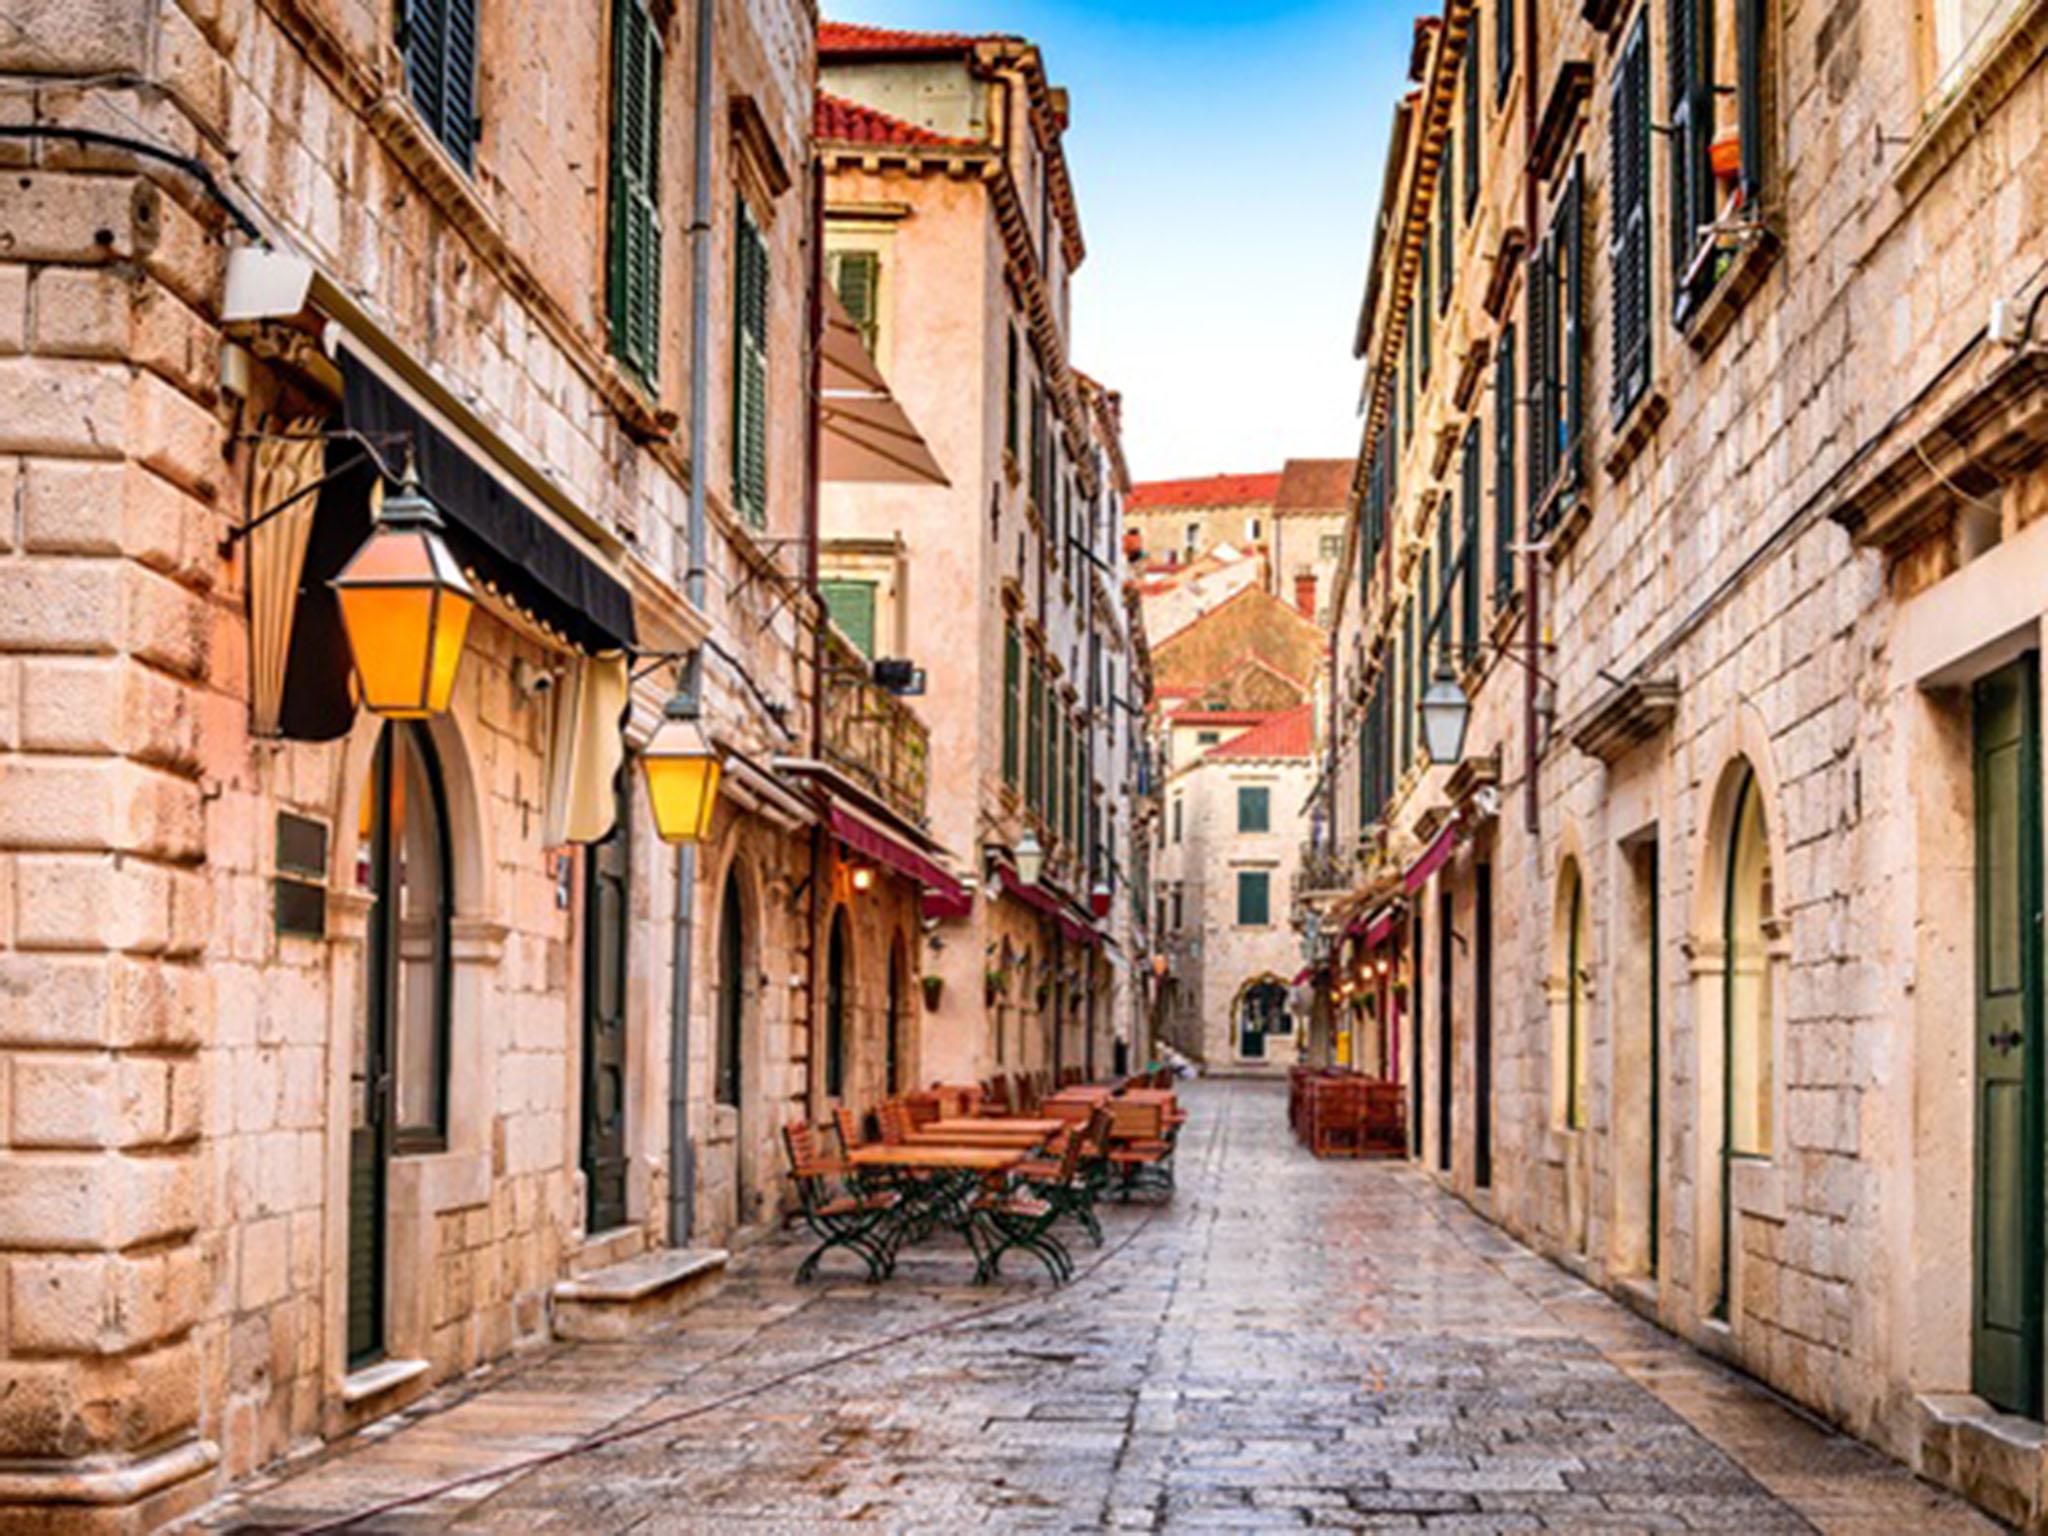 Recognise it? Dubrovnik’s streets feature heavily in TV series ‘Game of Thrones’